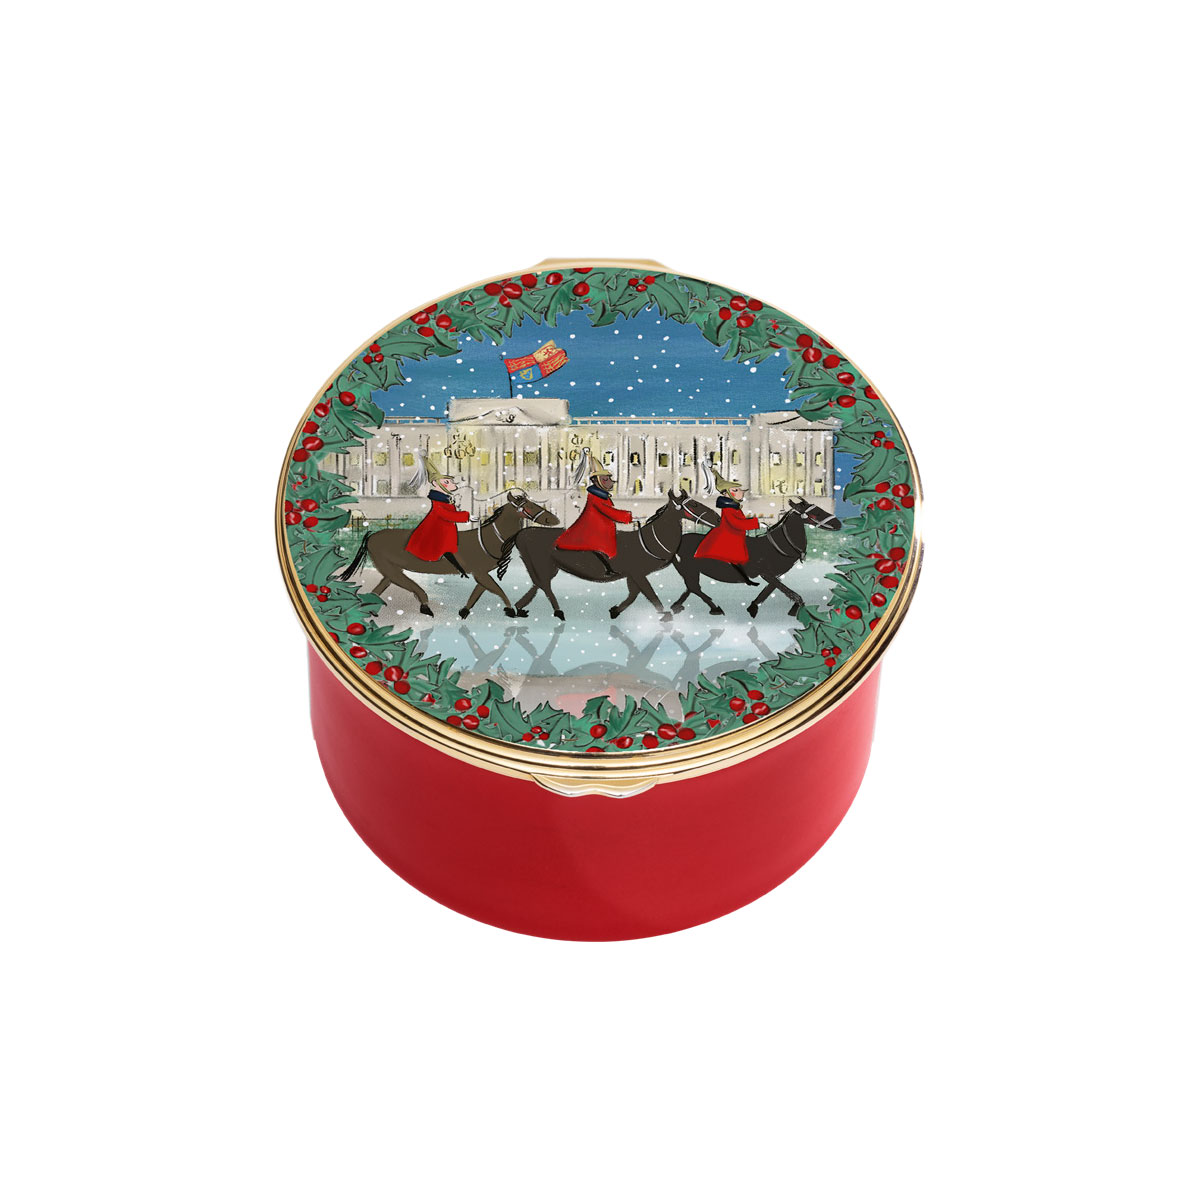 Halcyon Days Life Guards in the Snow 'The First Noel' Musical Enamel Box LE 100